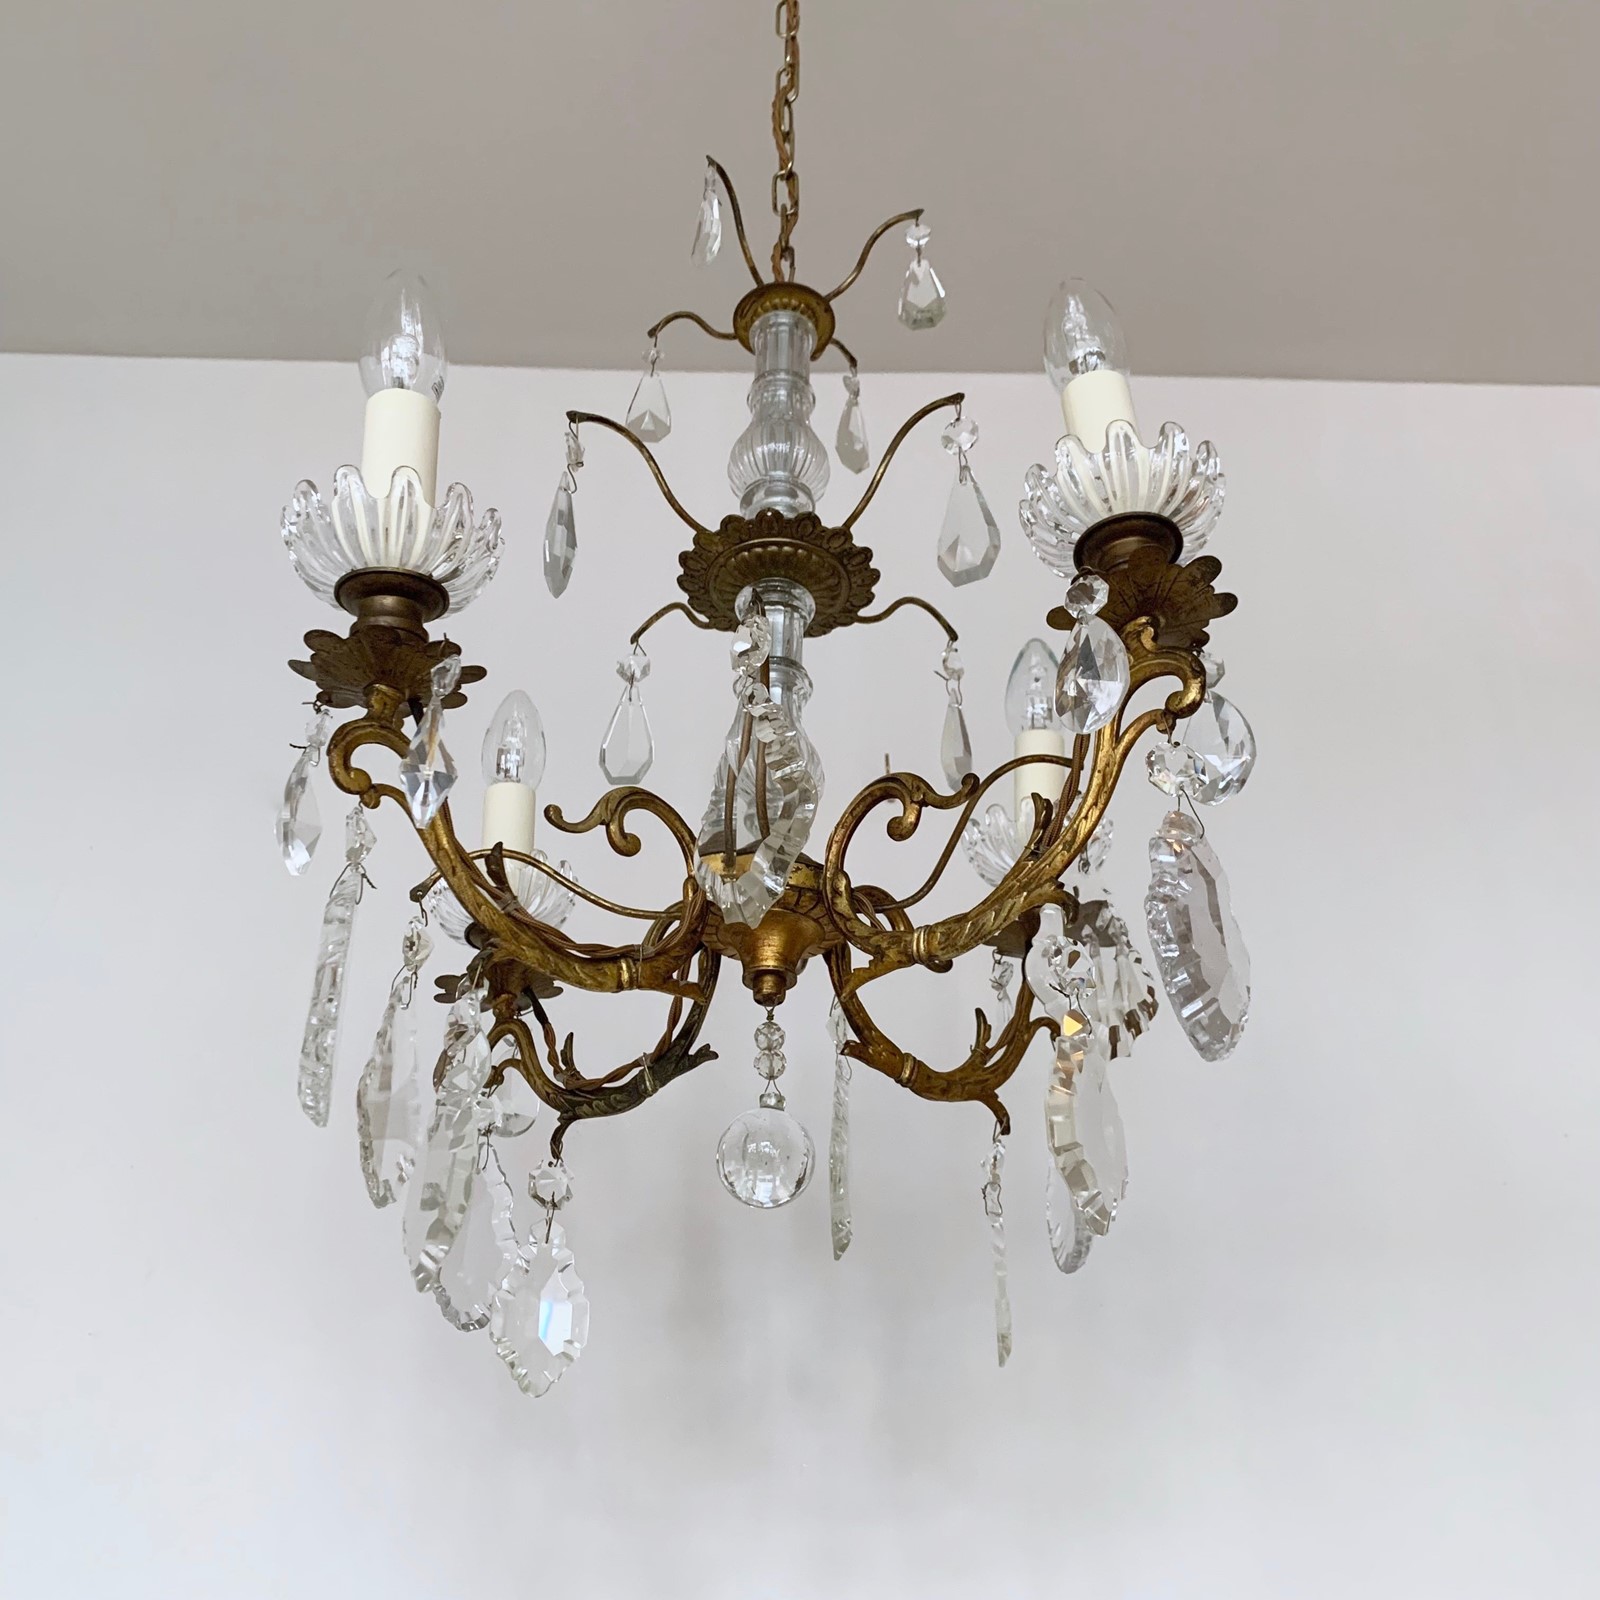 French Gilt Brass Chandelier with Crystal Drops - The Hoarde Vintage